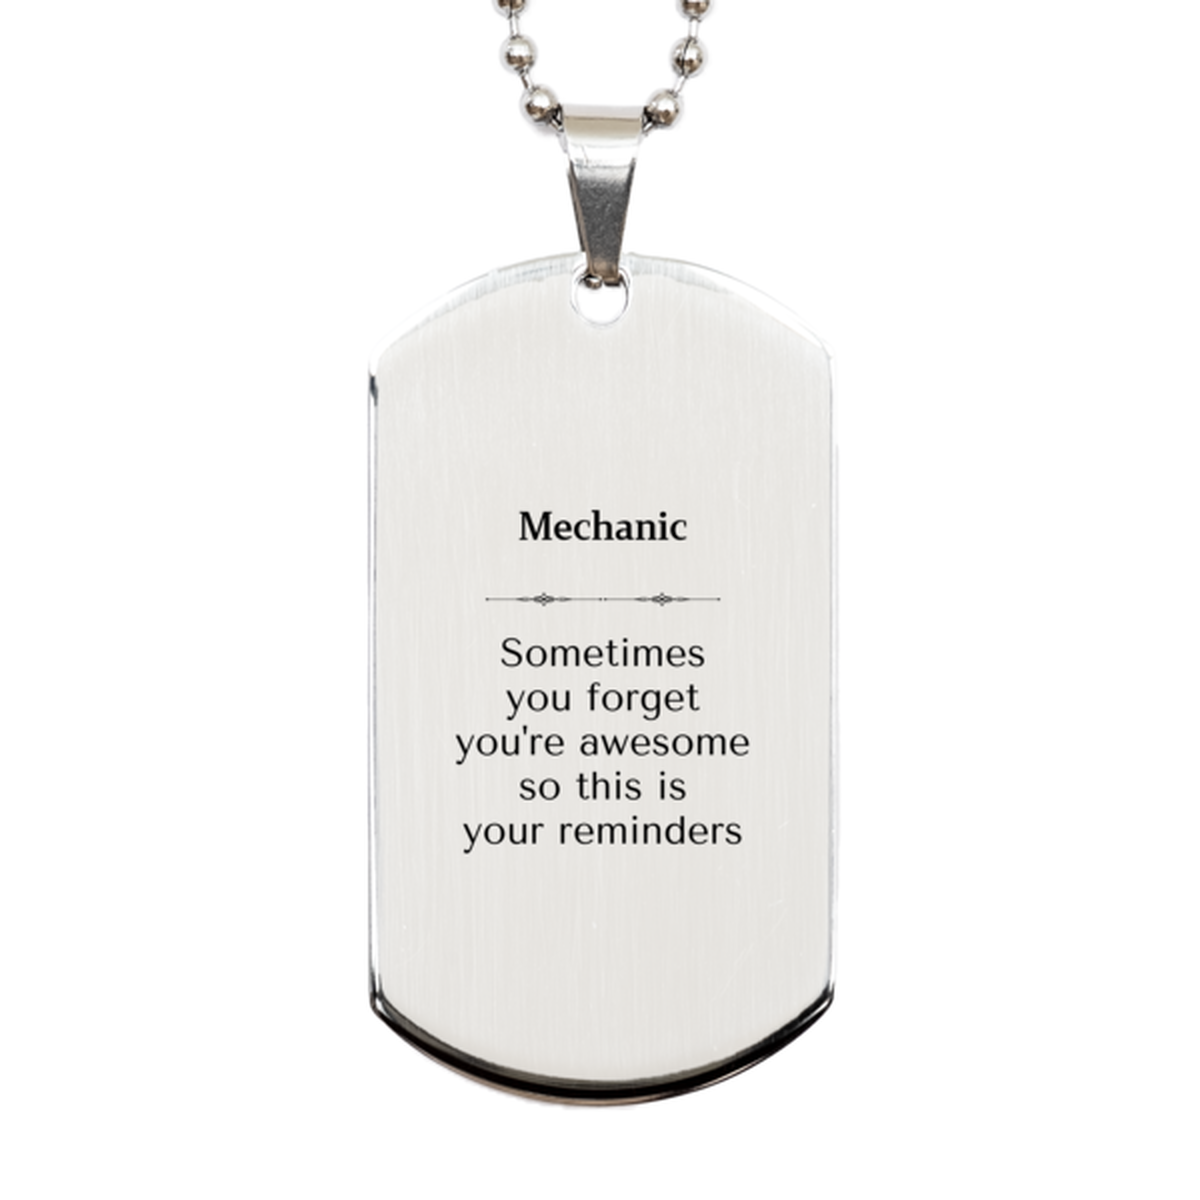 Sentimental Mechanic Silver Dog Tag, Mechanic Sometimes you forget you're awesome so this is your reminders, Graduation Christmas Birthday Gifts for Mechanic, Men, Women, Coworkers